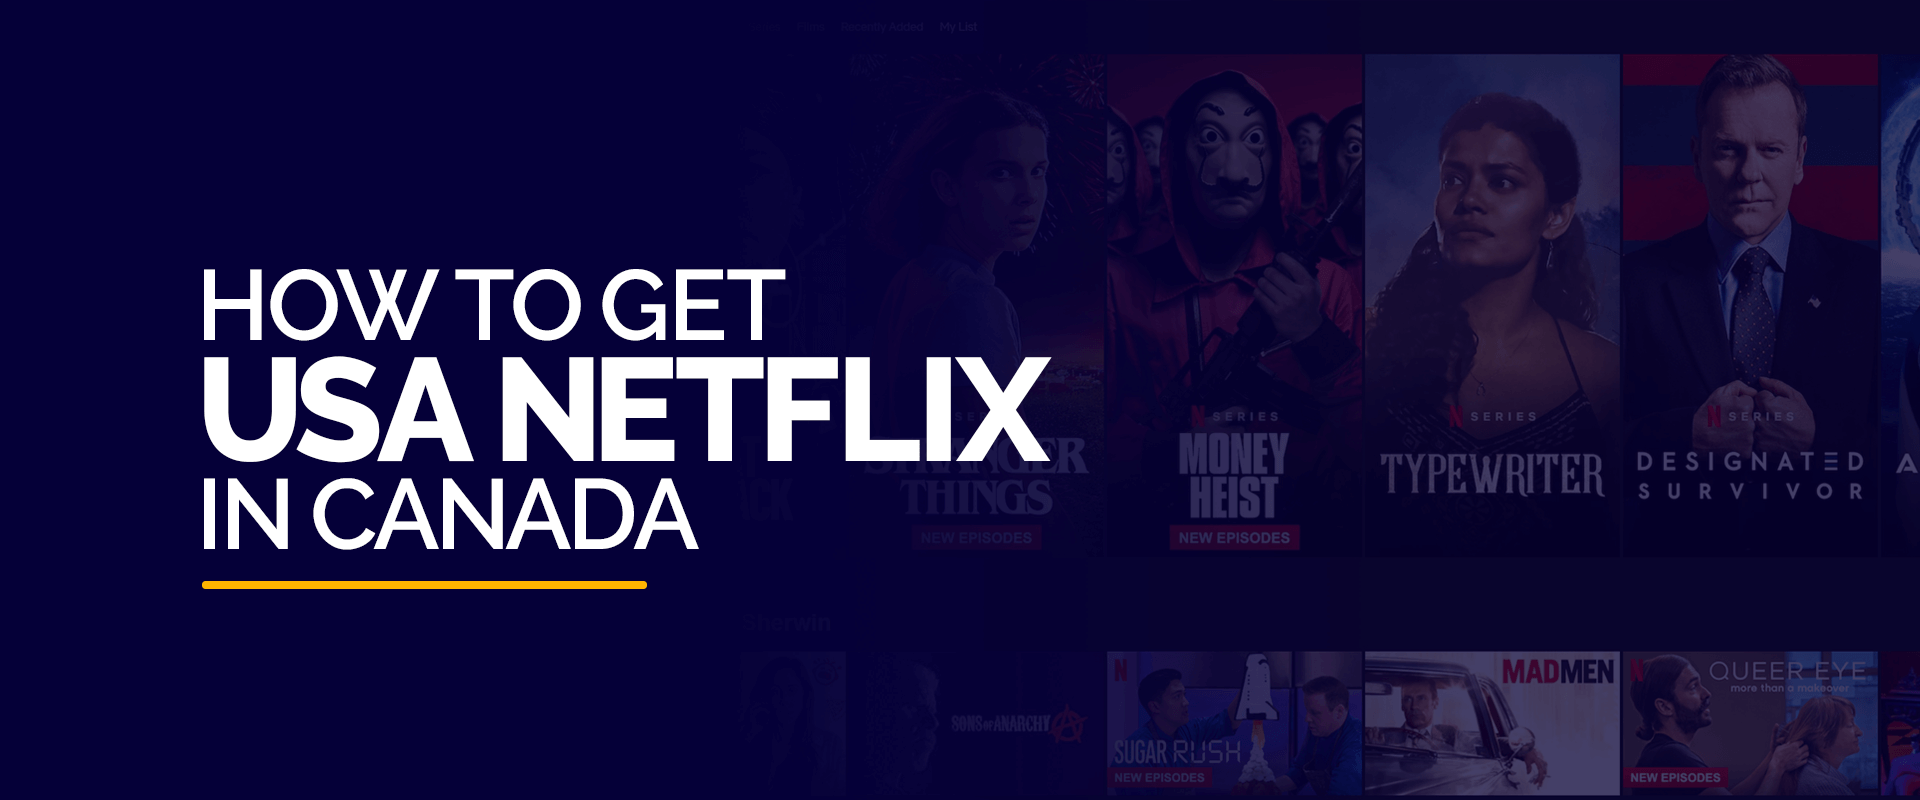 how to get american netflix in canada on sony tv